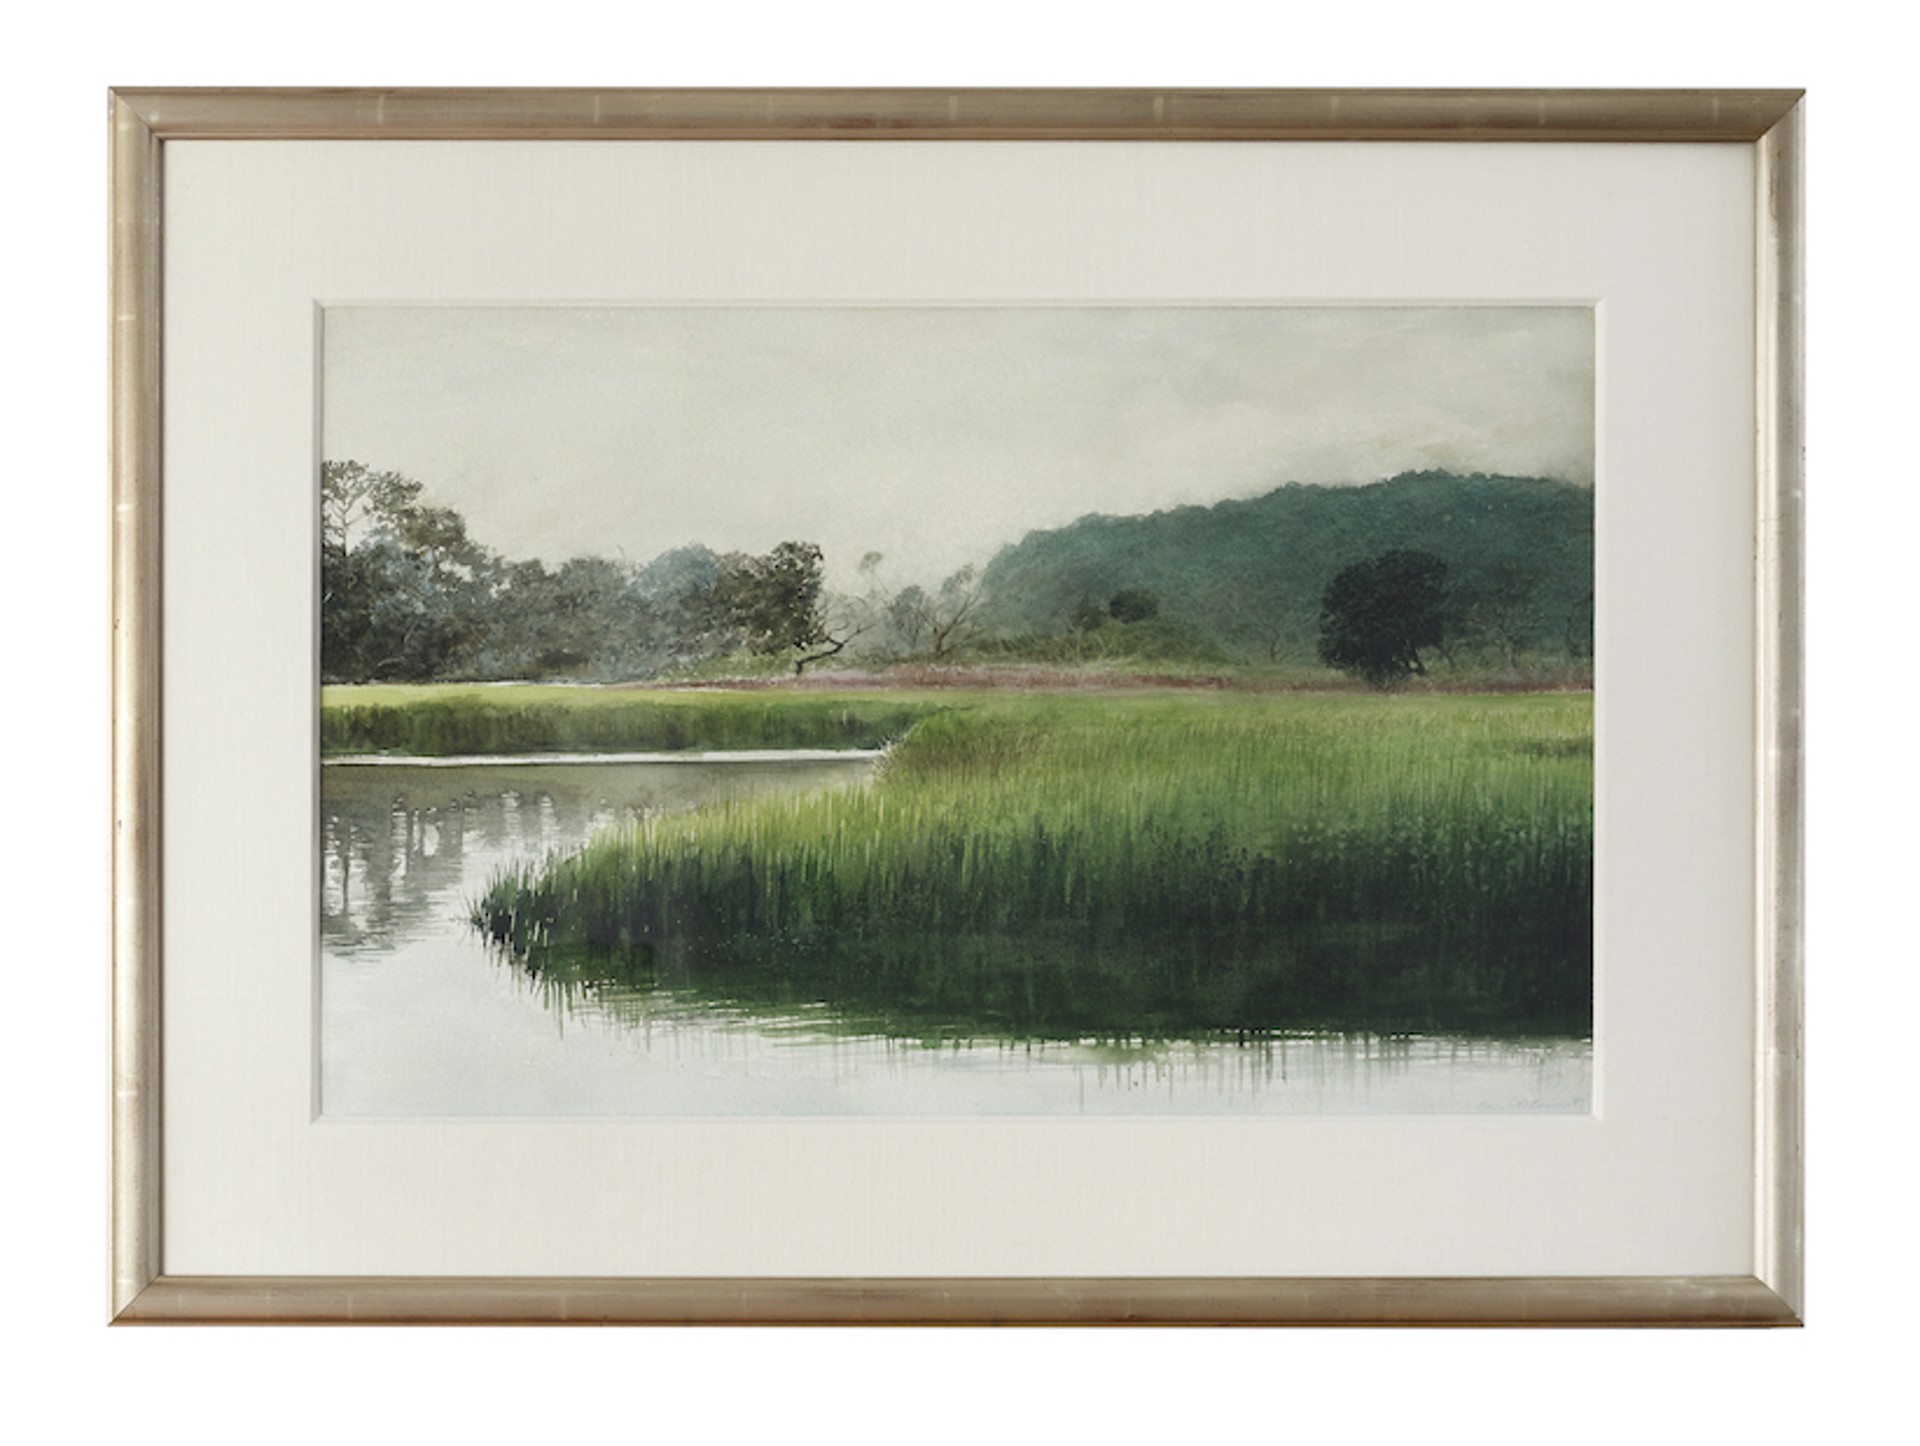 Marsh with Sweet Grass by Earl B. Lewis